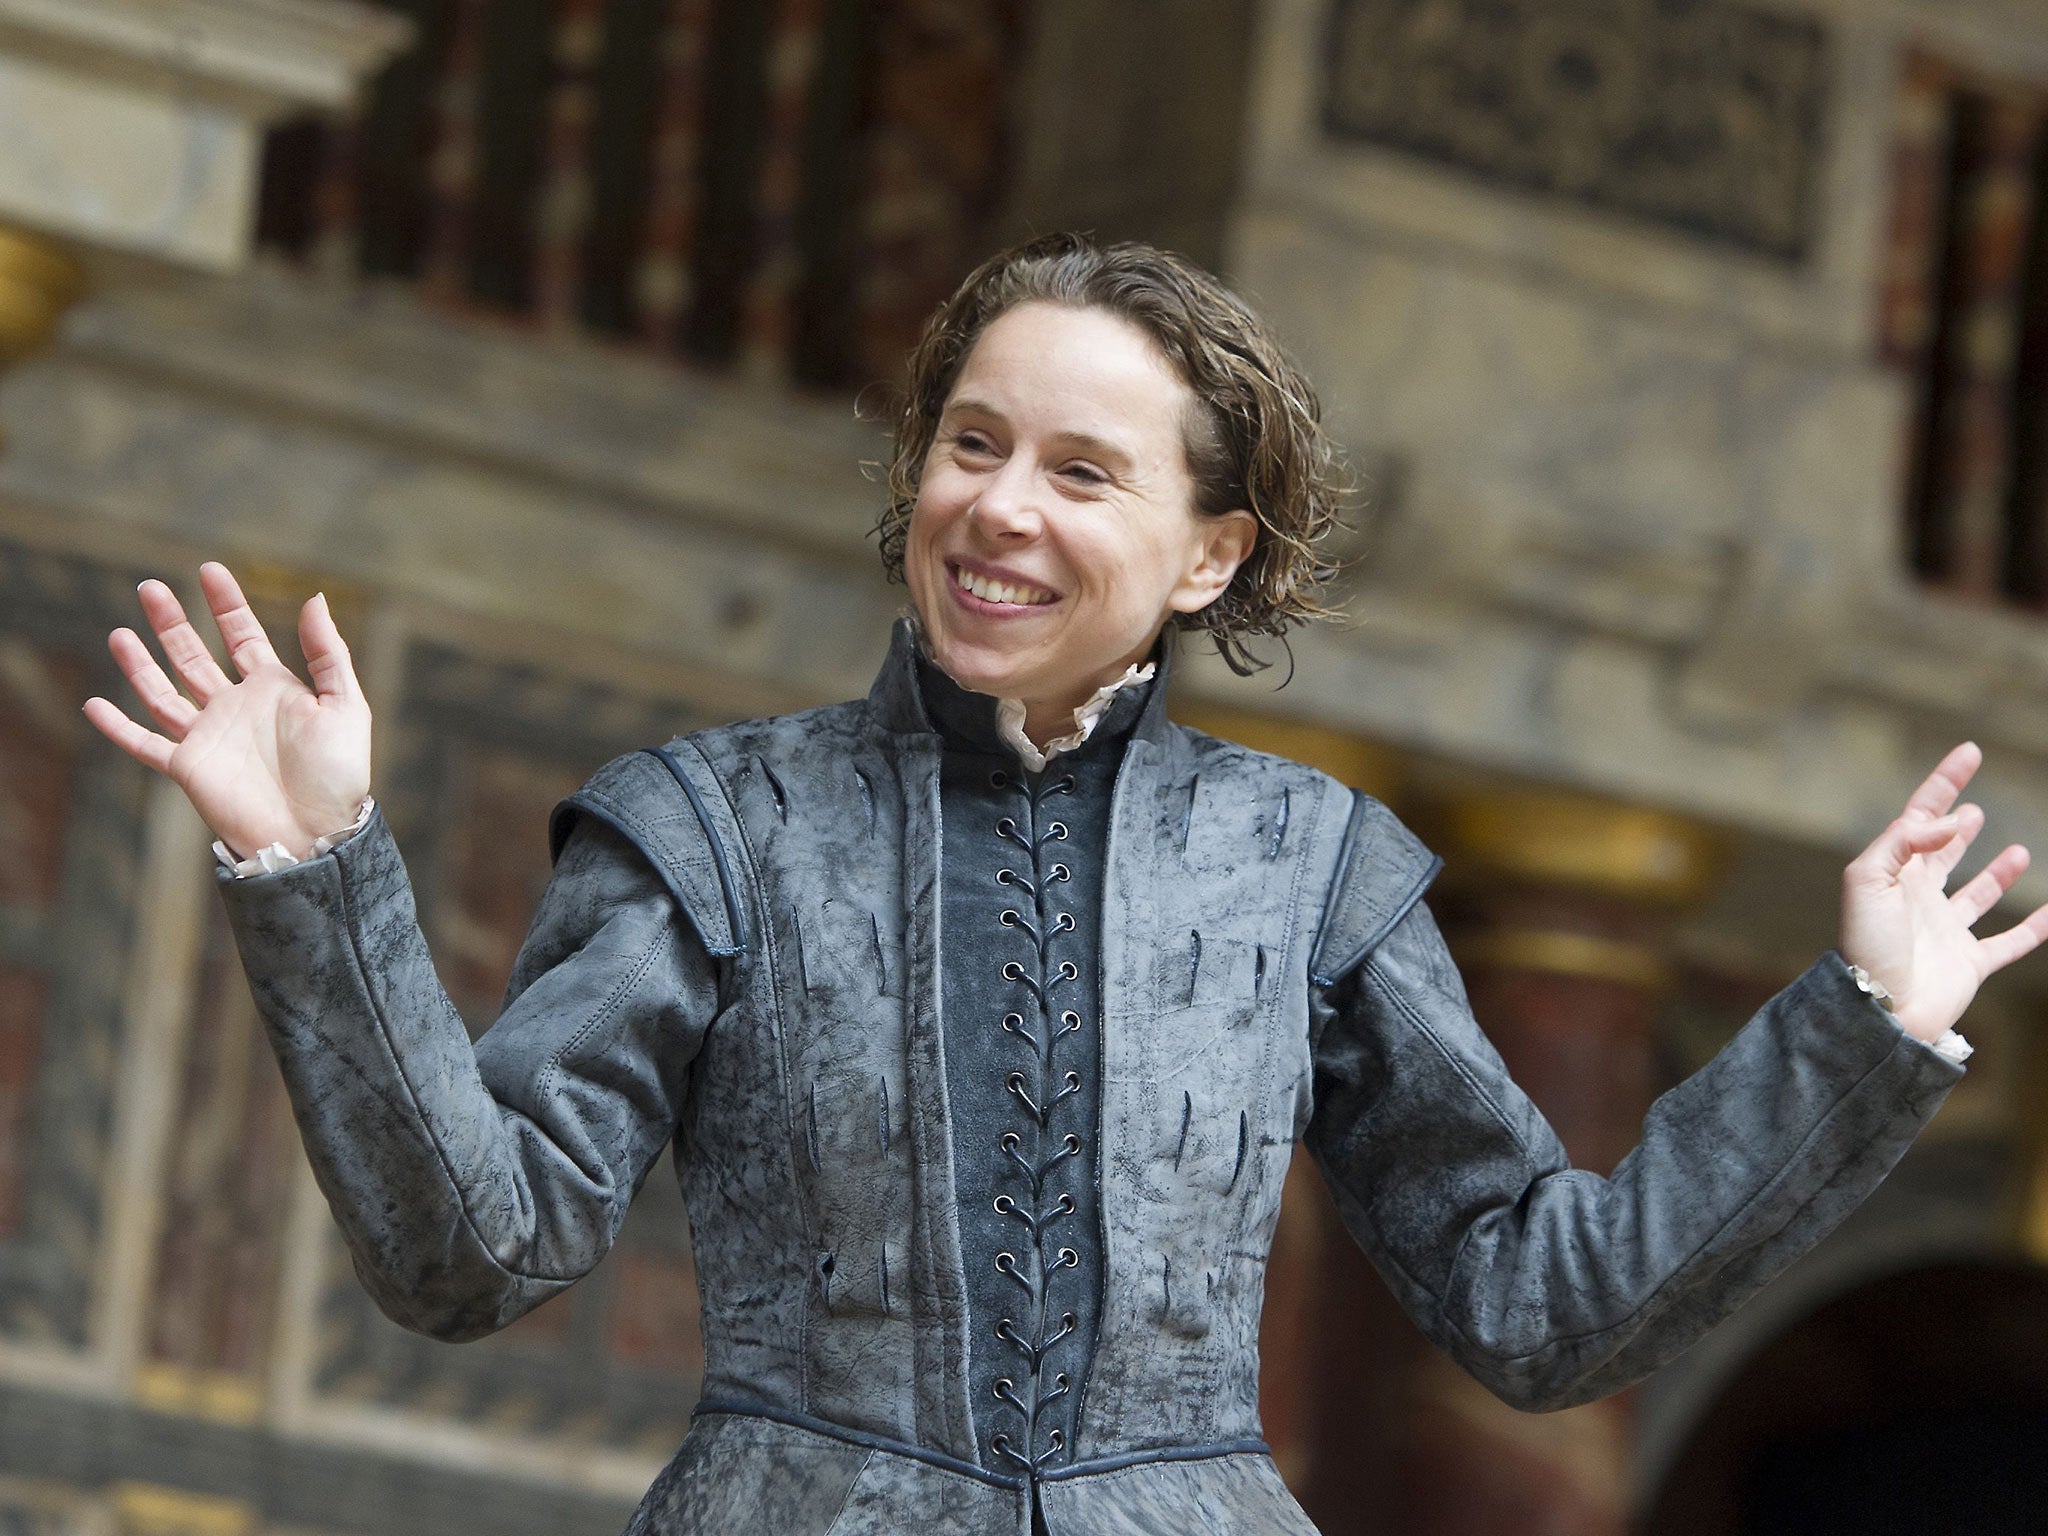 Terry as Rosalind – cross-dressed as Ganymede – in ‘As You Like It’ at the Globe in 2015